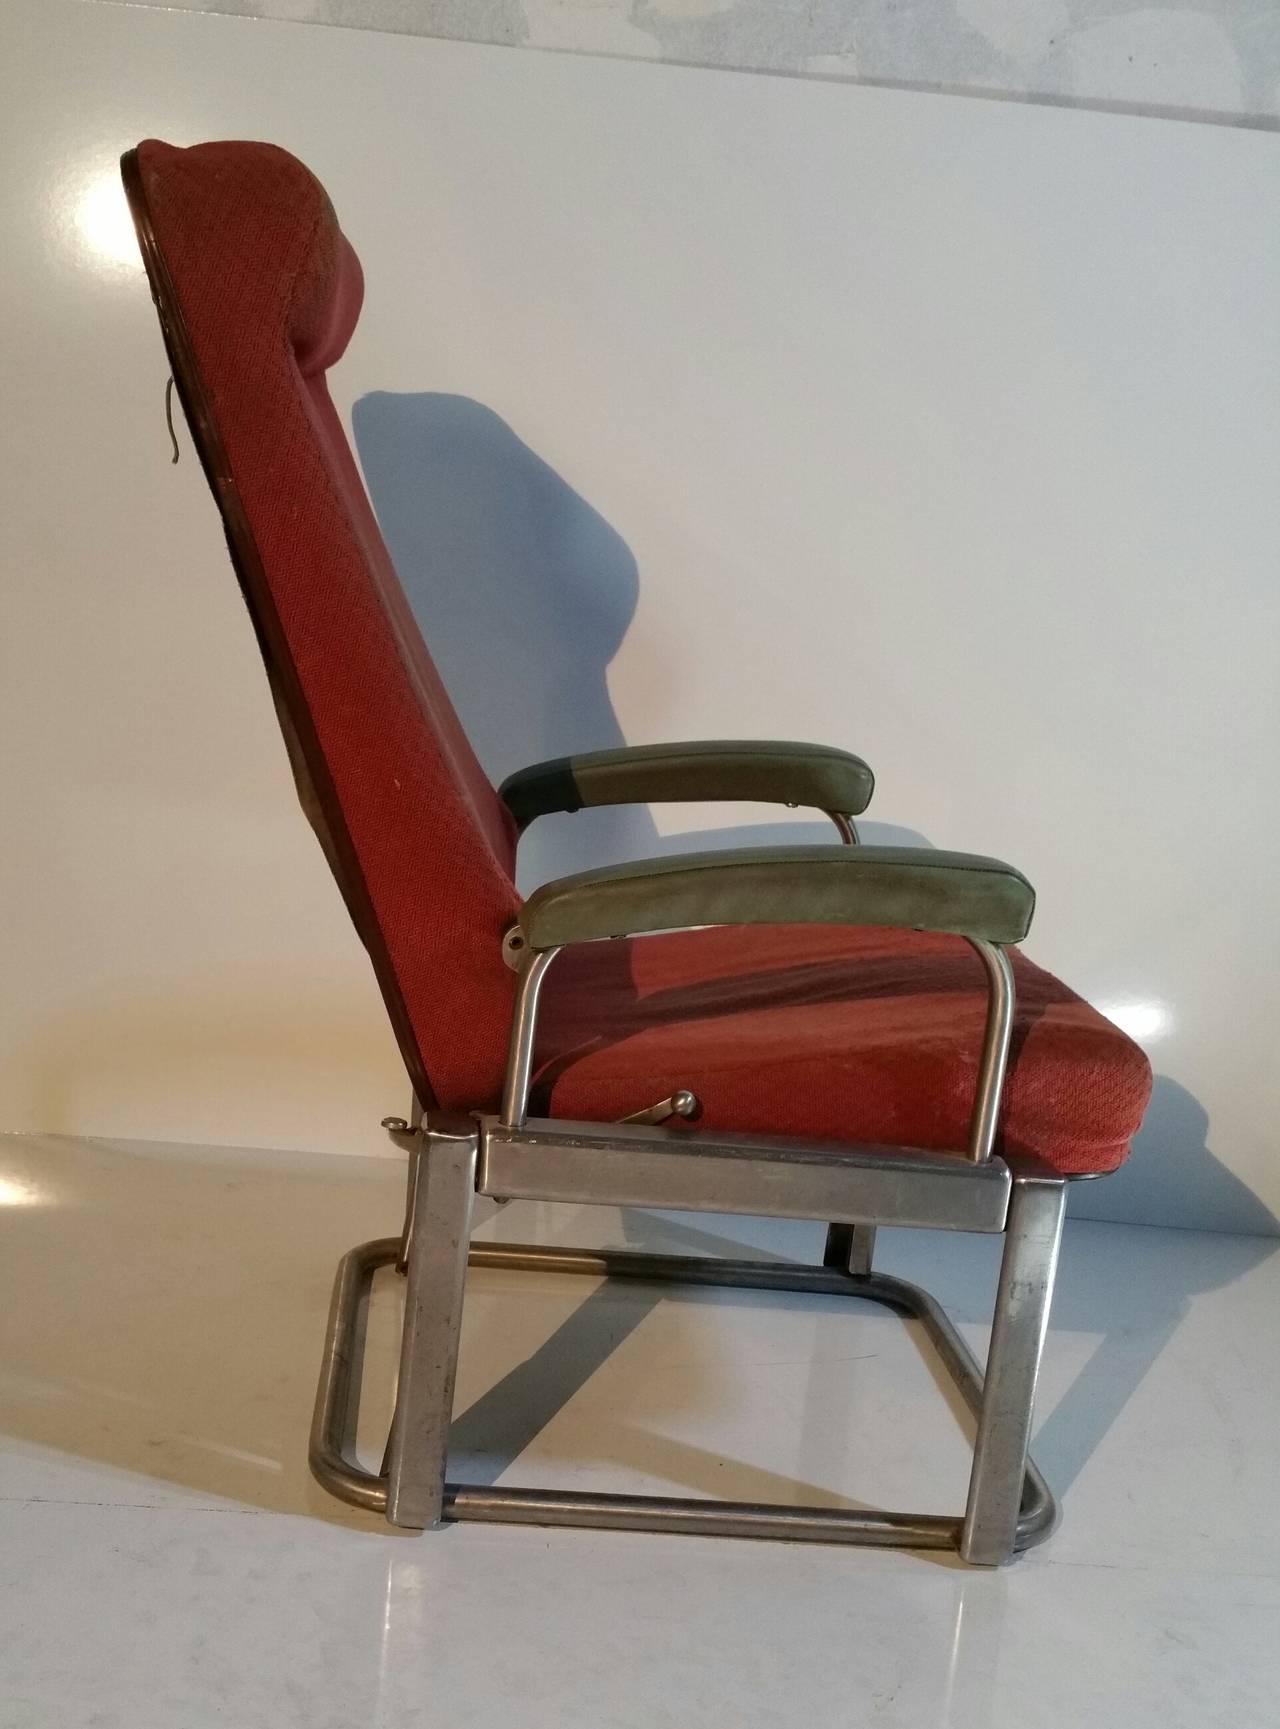 American Henry Dreyfuss Industrial or Machine Age Lounge Chair for Pullman Train